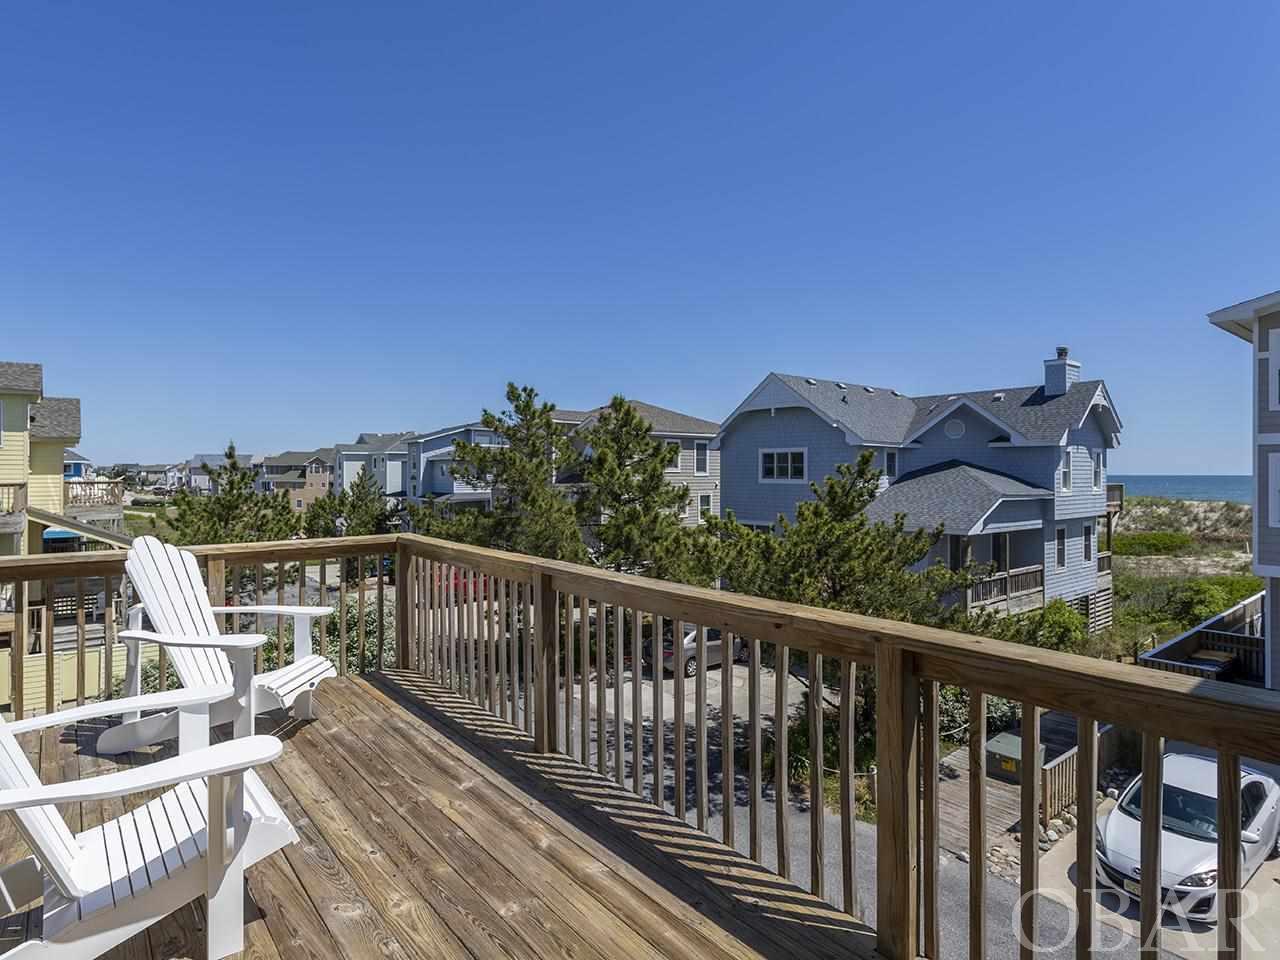 715 Spinnaker Arch, Corolla, NC 27927, 4 Bedrooms Bedrooms, ,2 BathroomsBathrooms,Residential,For Sale,Spinnaker Arch,114405